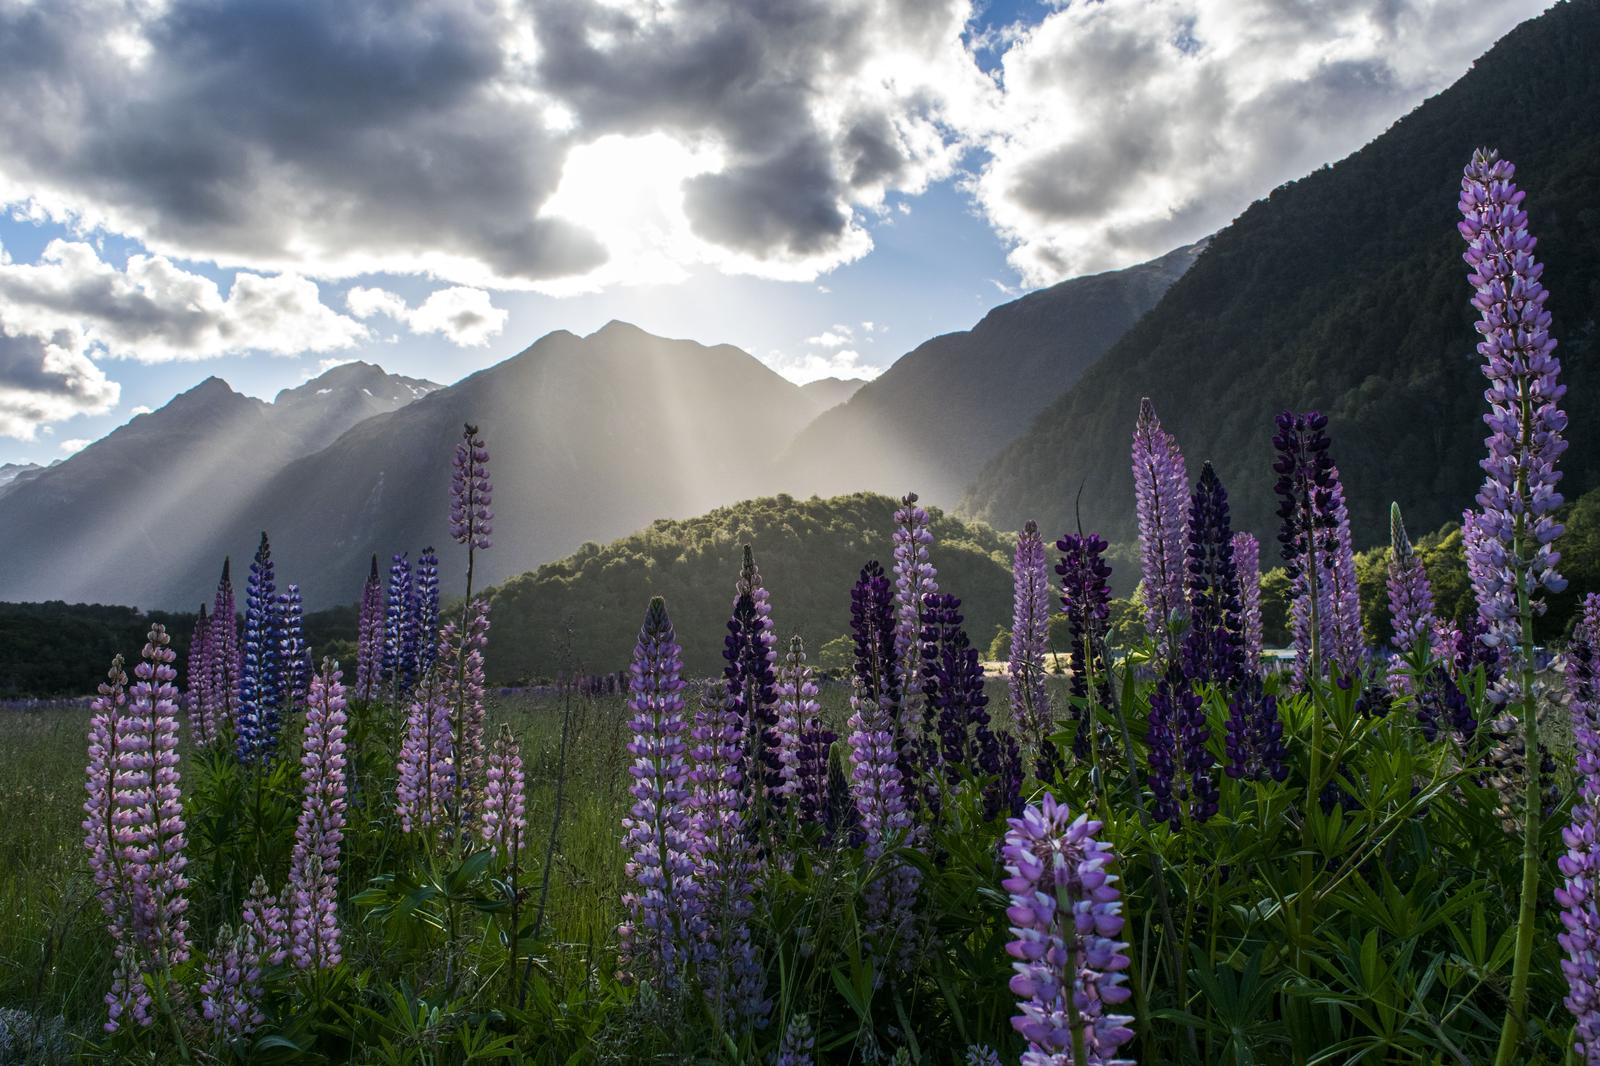 Here Are 24 Glorious Natural Attractions – Can You Match Them to Their Country? New Zealand